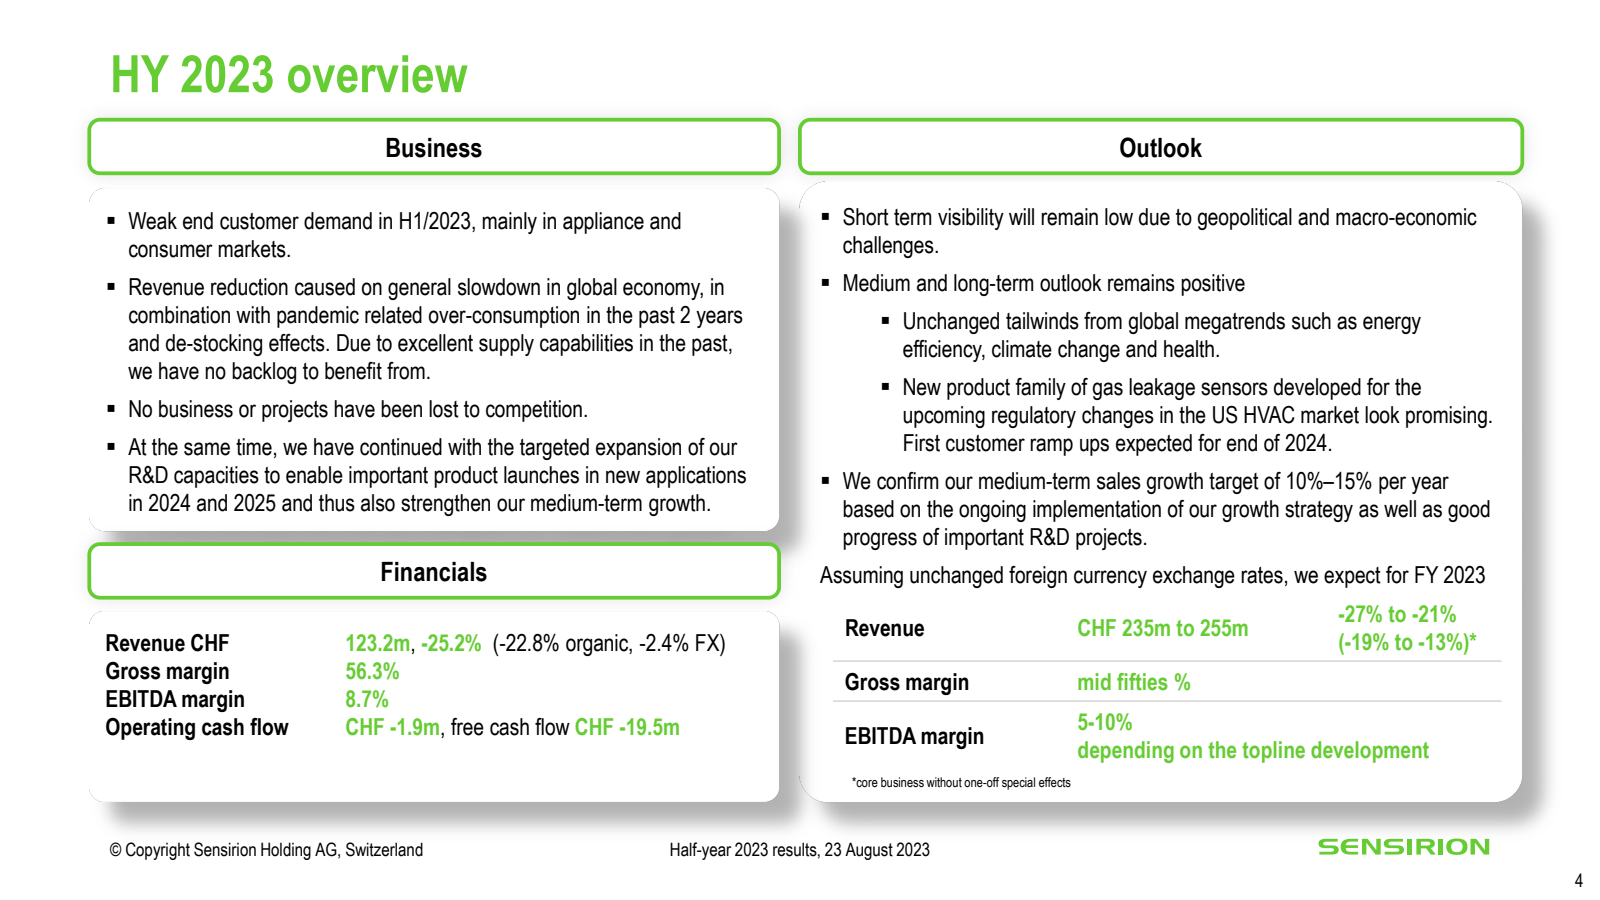 HY 2023 overview 

B